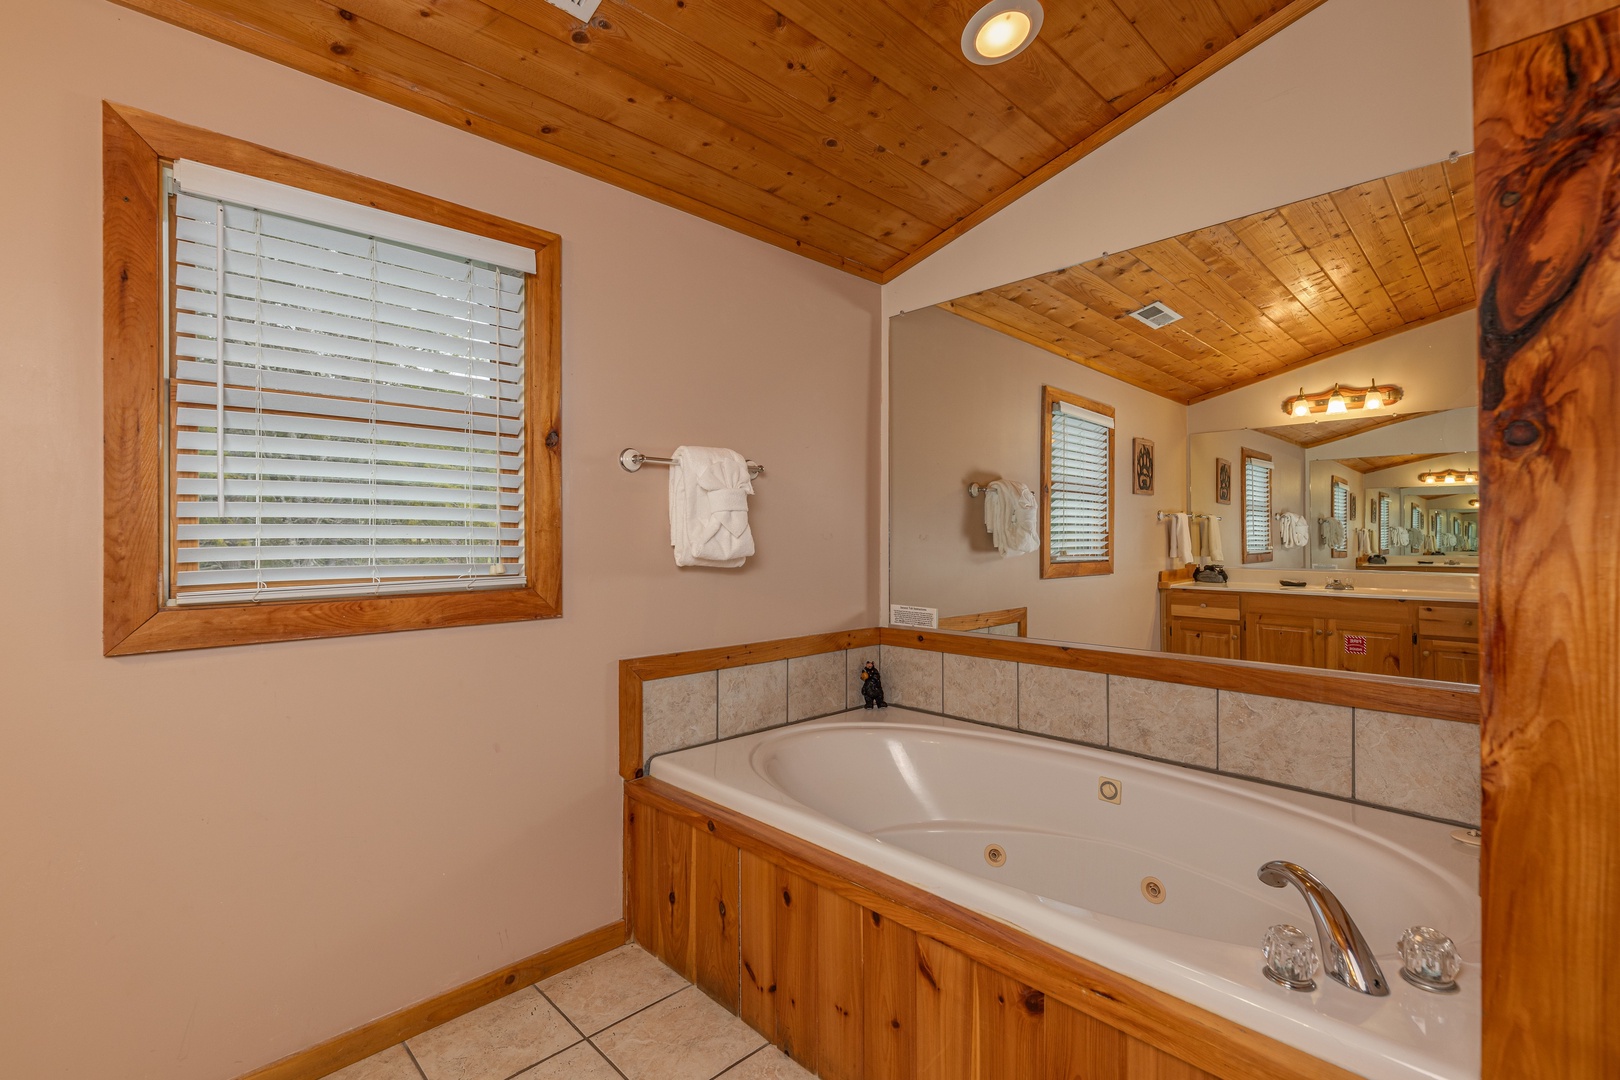 Jacuzzi in a bathroom at Almost Bearadise, a 4 bedroom cabin rental located in Pigeon Forge